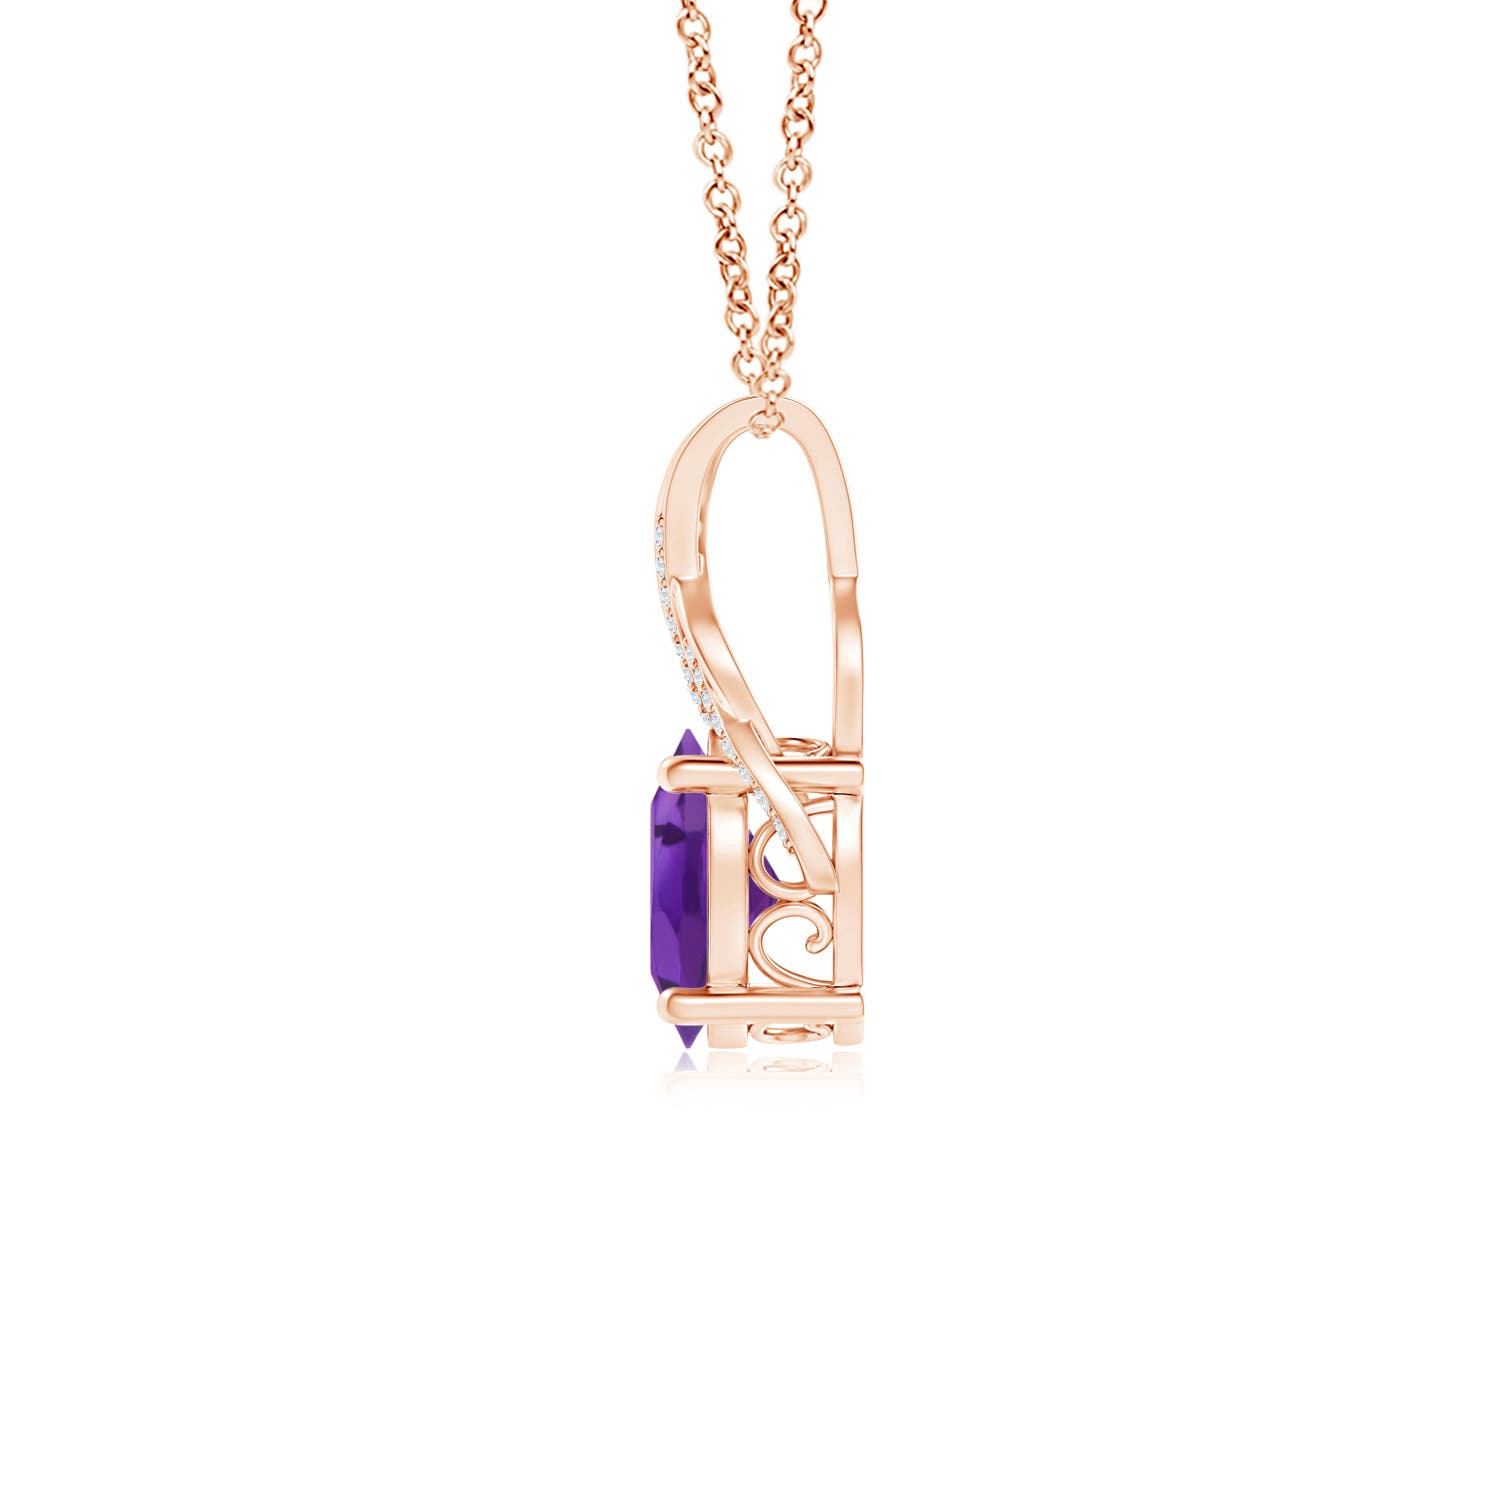 AAA - Amethyst / 2.35 CT / 14 KT Rose Gold